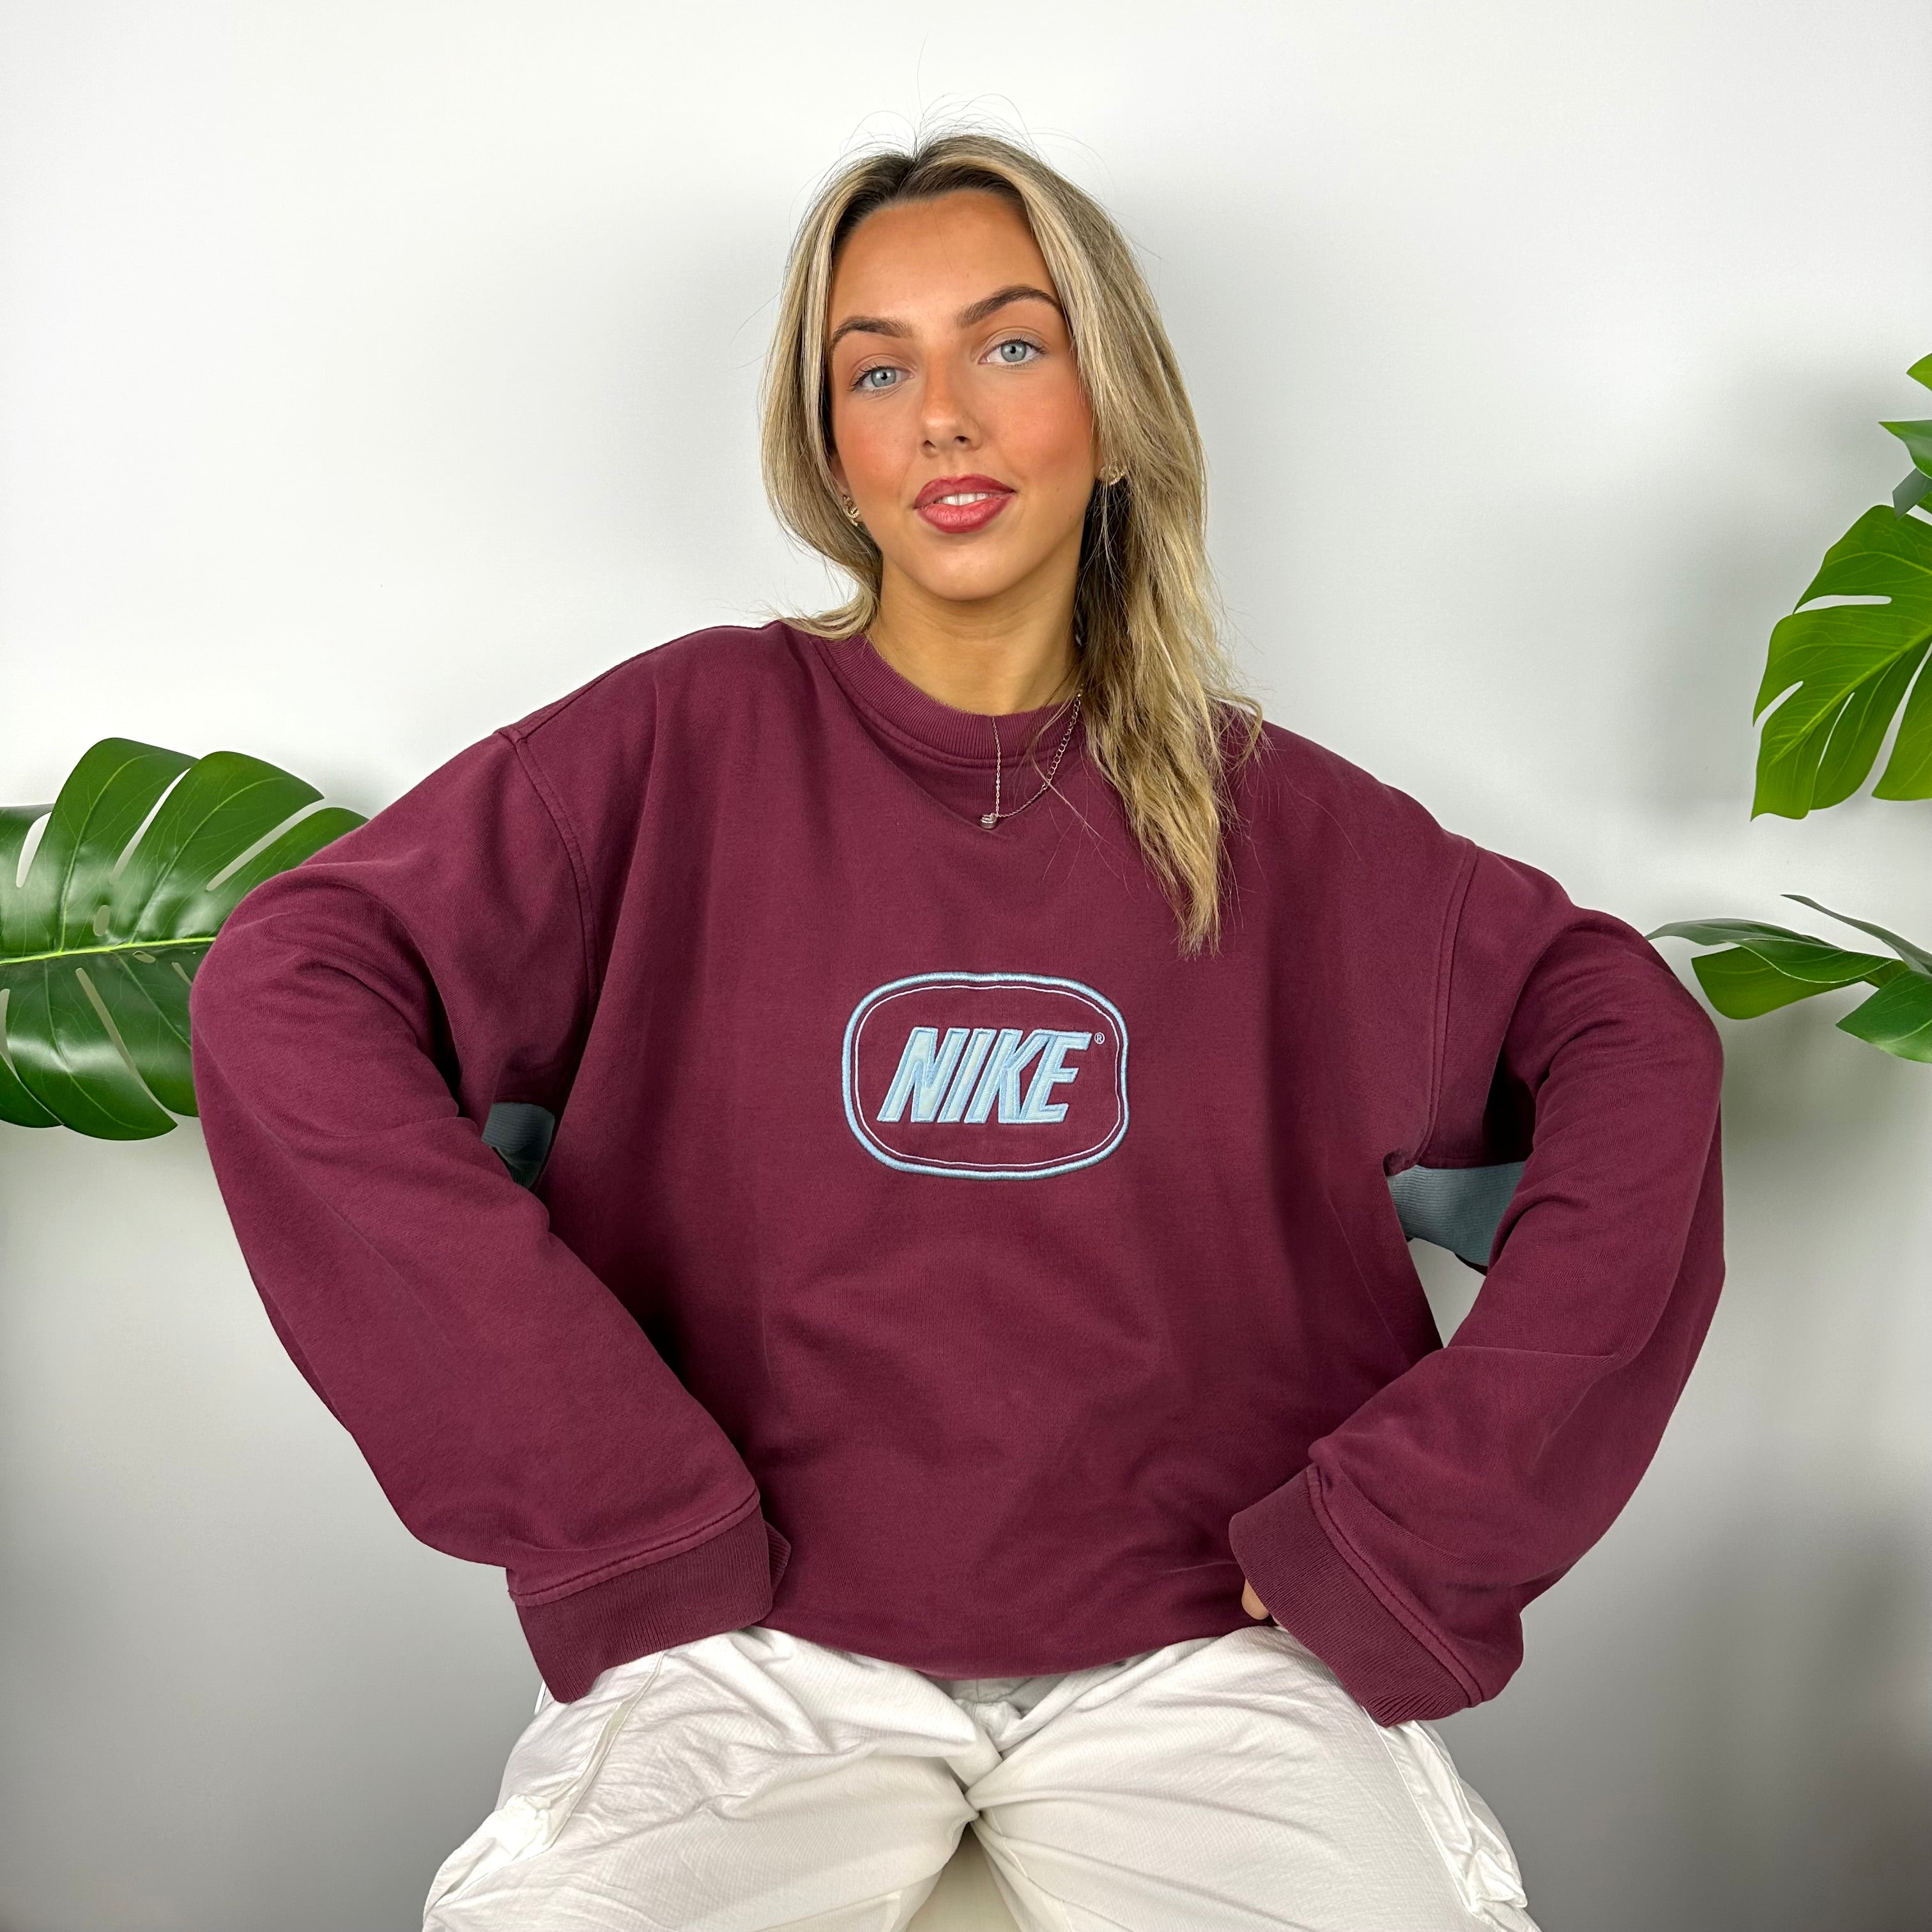 Nike Maroon Embroidered Spell Out Sweatshirt (XXL)